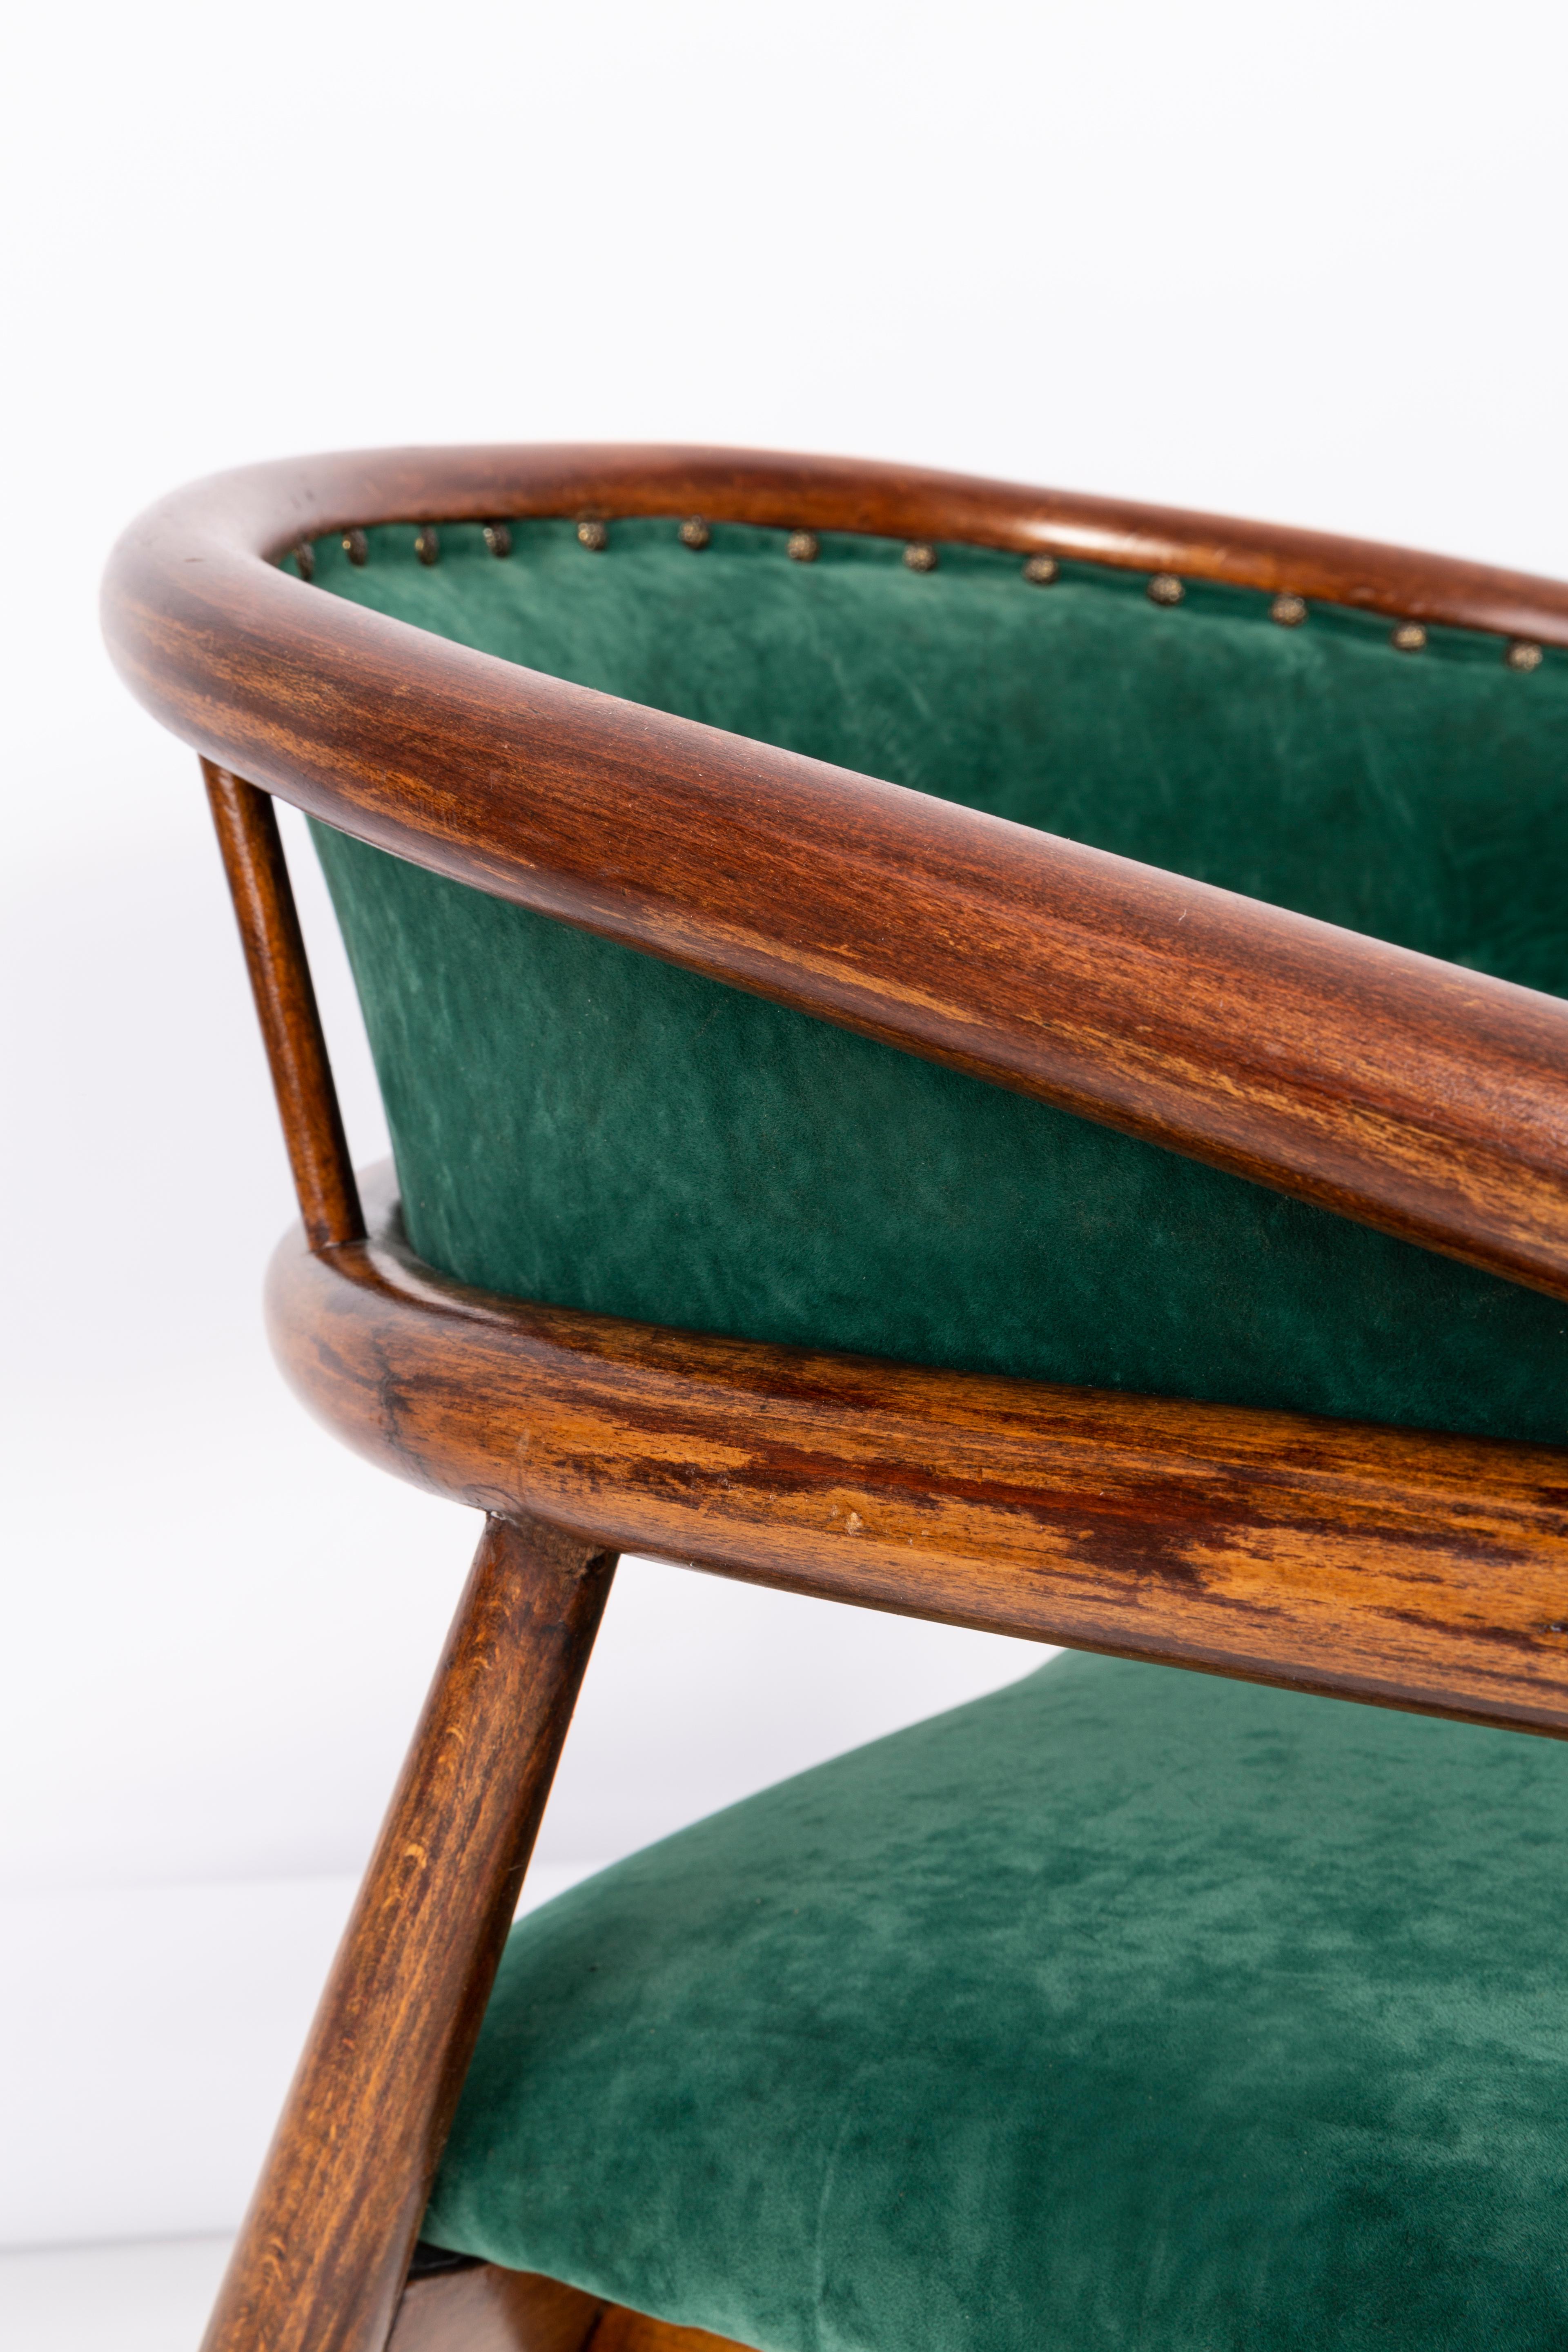 Hand-Crafted Set of Two James Mont Bent Beech Armchairs, Dark Green, B-3300 Type, 1960s For Sale